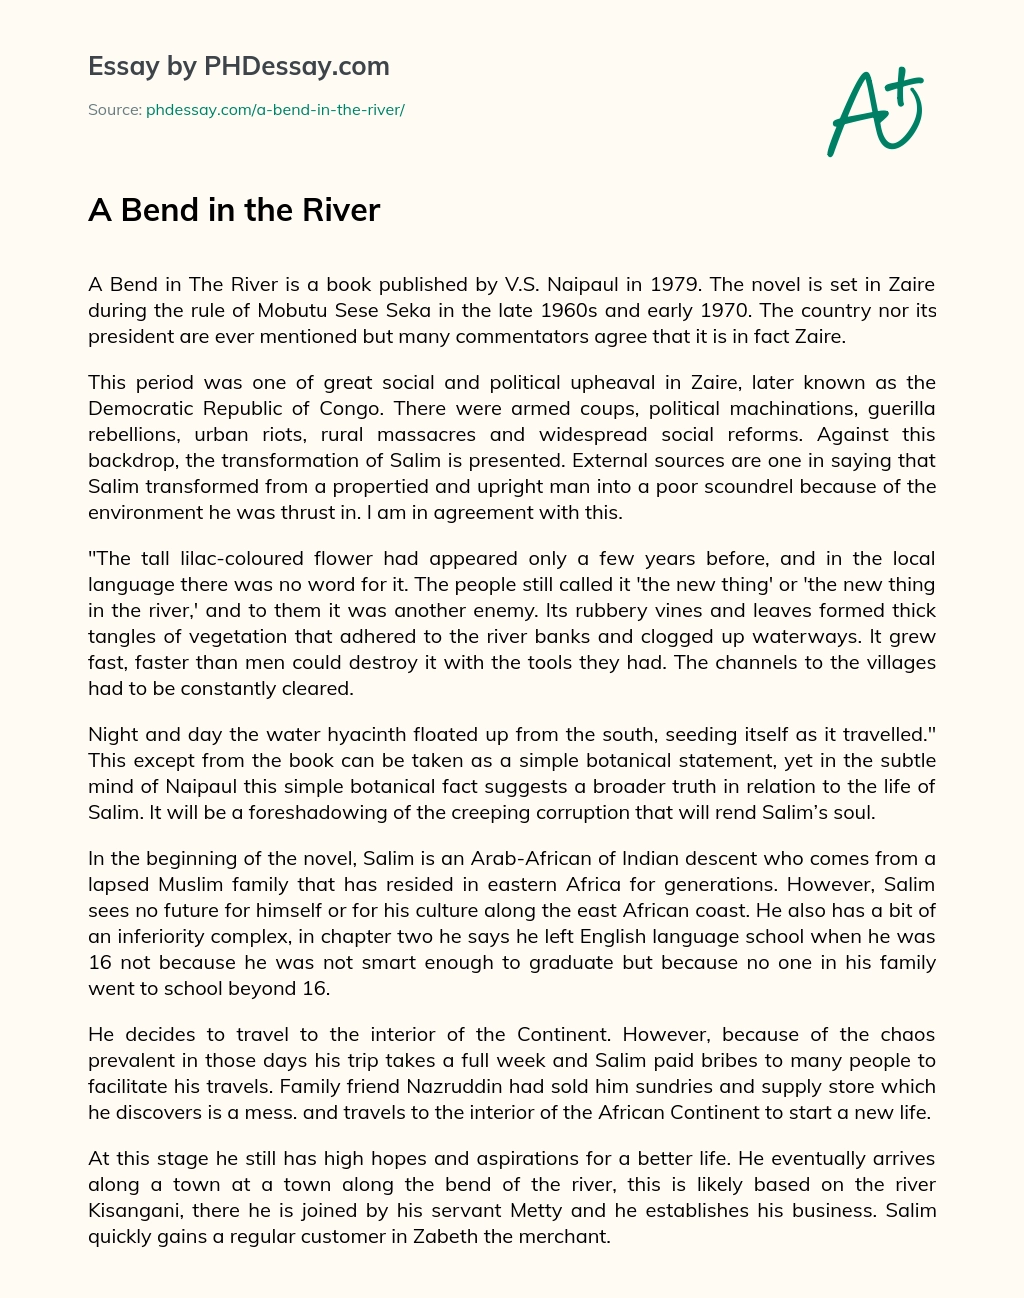 A Bend in the River essay